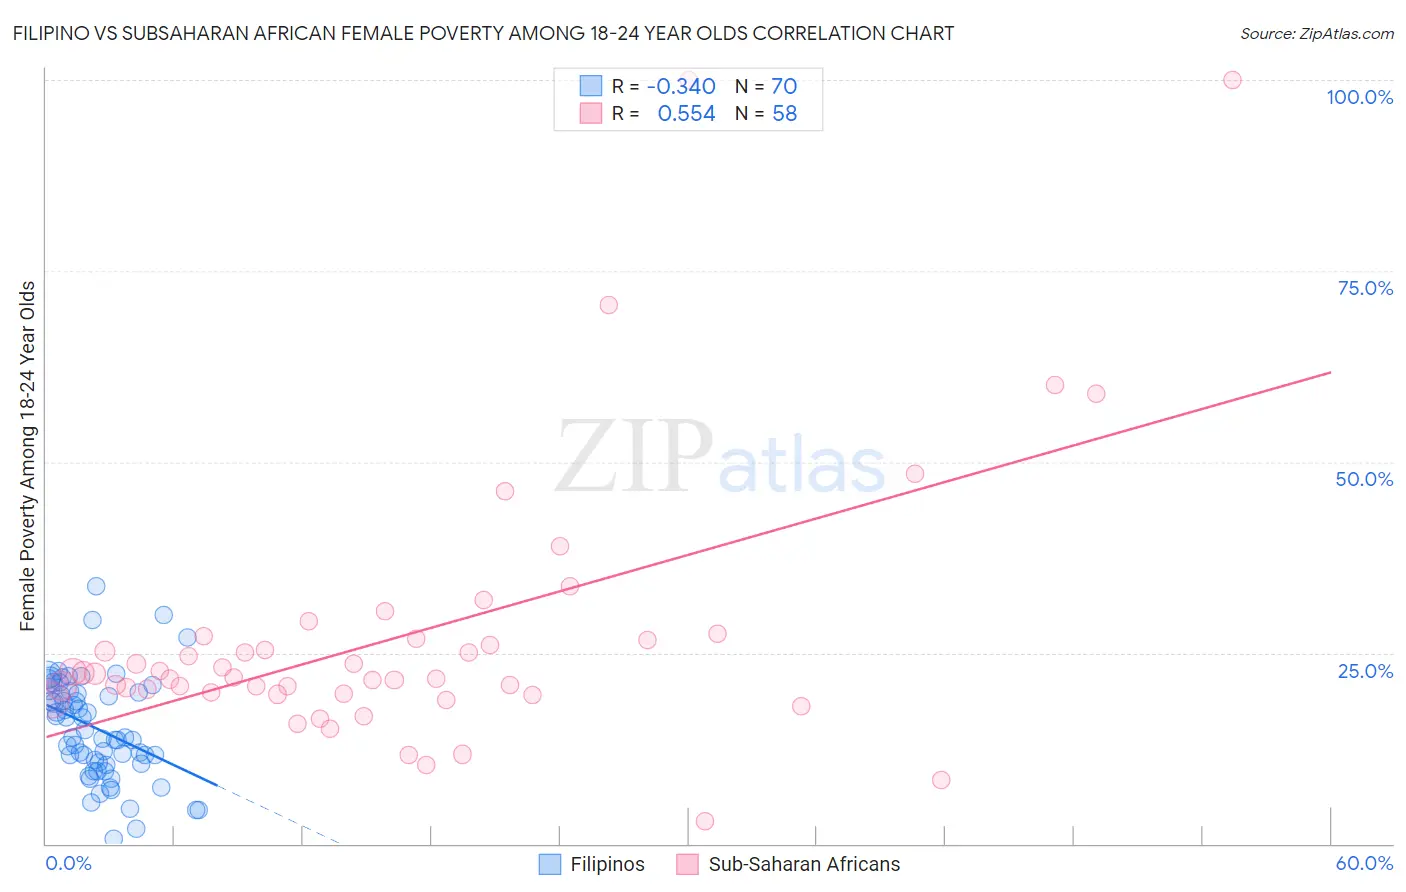 Filipino vs Subsaharan African Female Poverty Among 18-24 Year Olds